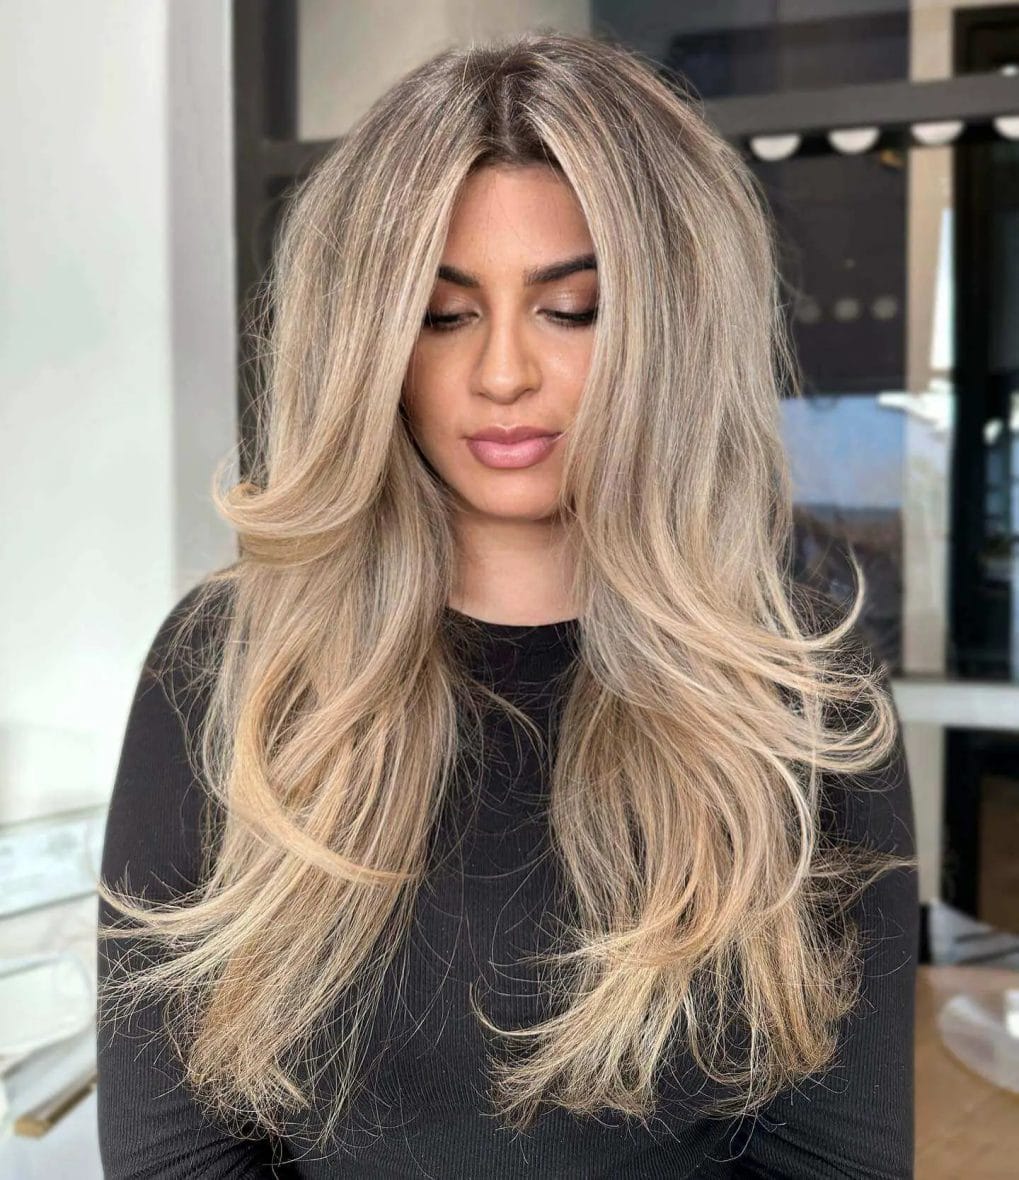 Blonde balayage blending cool ash and warm honey tones in flowing blowout layers.